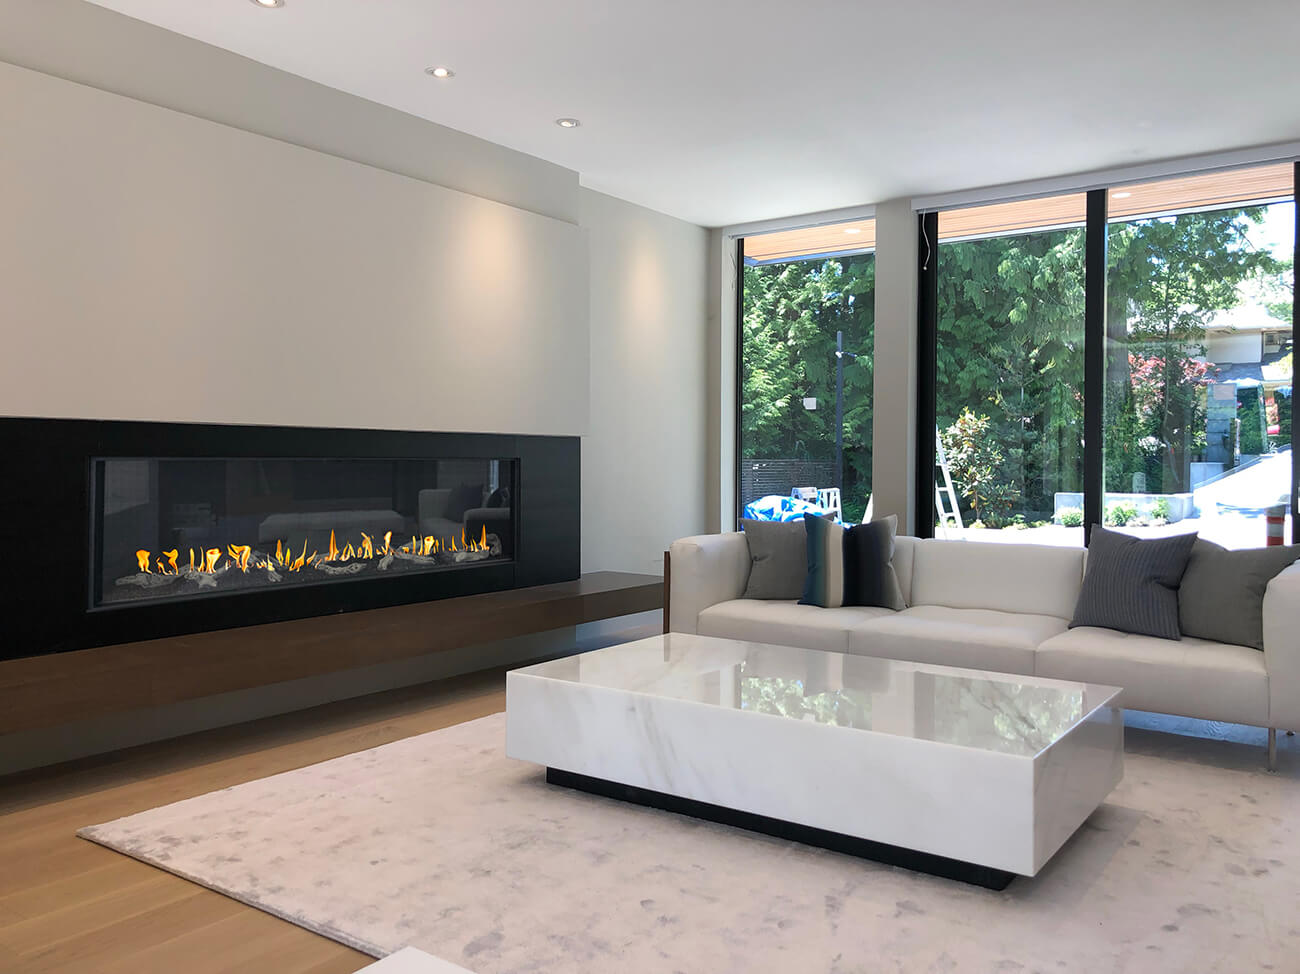 Running Gas Line to Existing Fireplace Elegant Find A Home for Your Flare – Flare Fireplaces